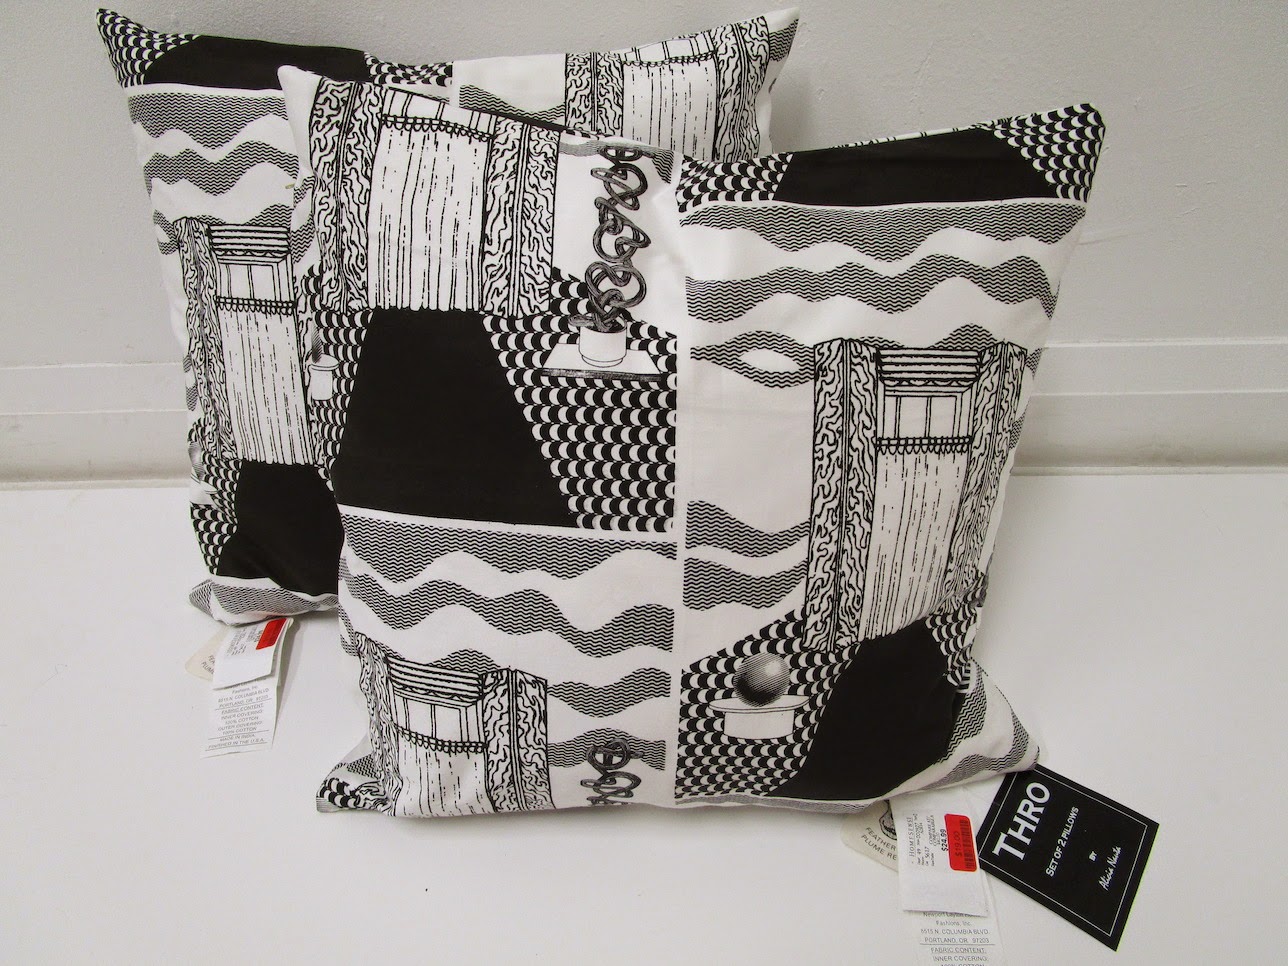  Thro Pillows on discount at Homesense  Screenprinted pillows and tags  Xpace Cultural Centre, November 2014   OUGHT  compiles the variety of suggestions posed by parents to their artist children in misguided attempts to support, encourage, or simply